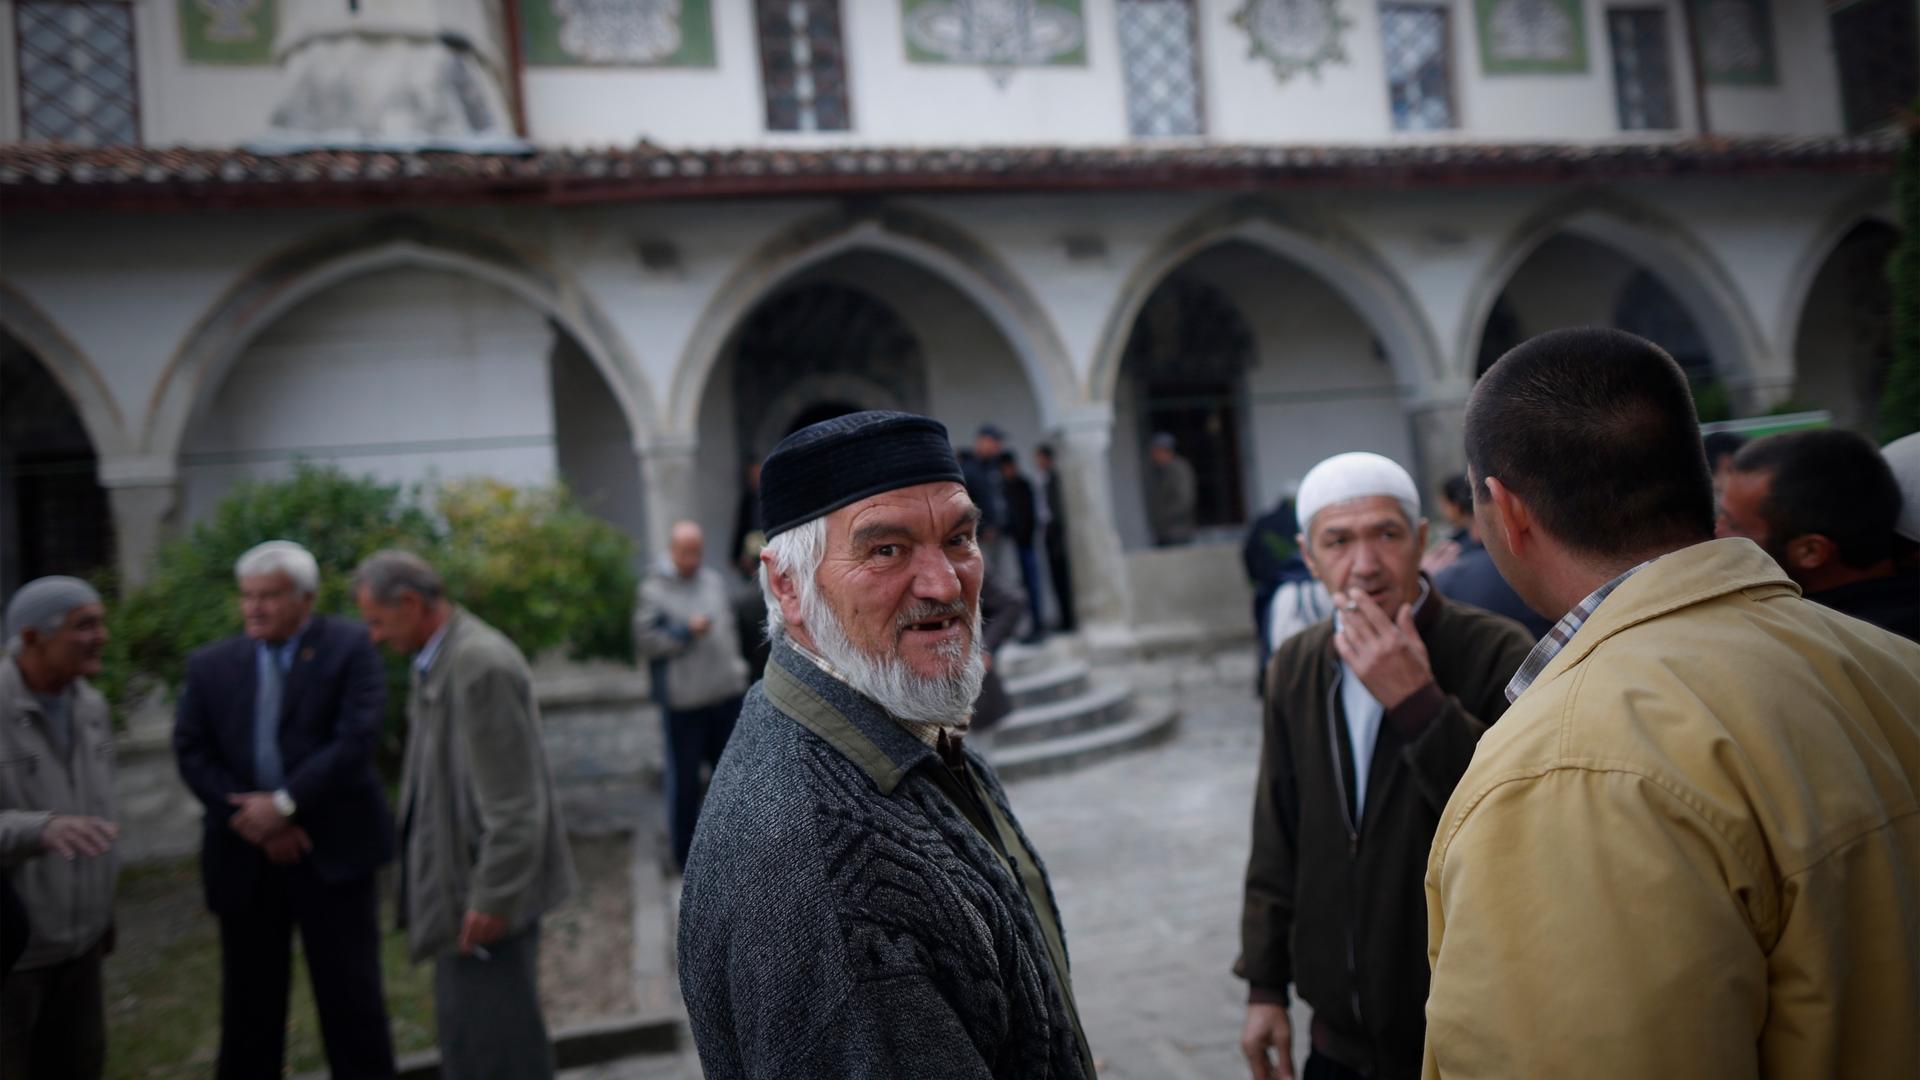 Crimean Tatars speak after the prayer in a Mosque marking the Eid al-Adha, celebrated by Muslims worldwide, in Bakhchisarai, Crimea, on Sat. Oct. 4, 2014.